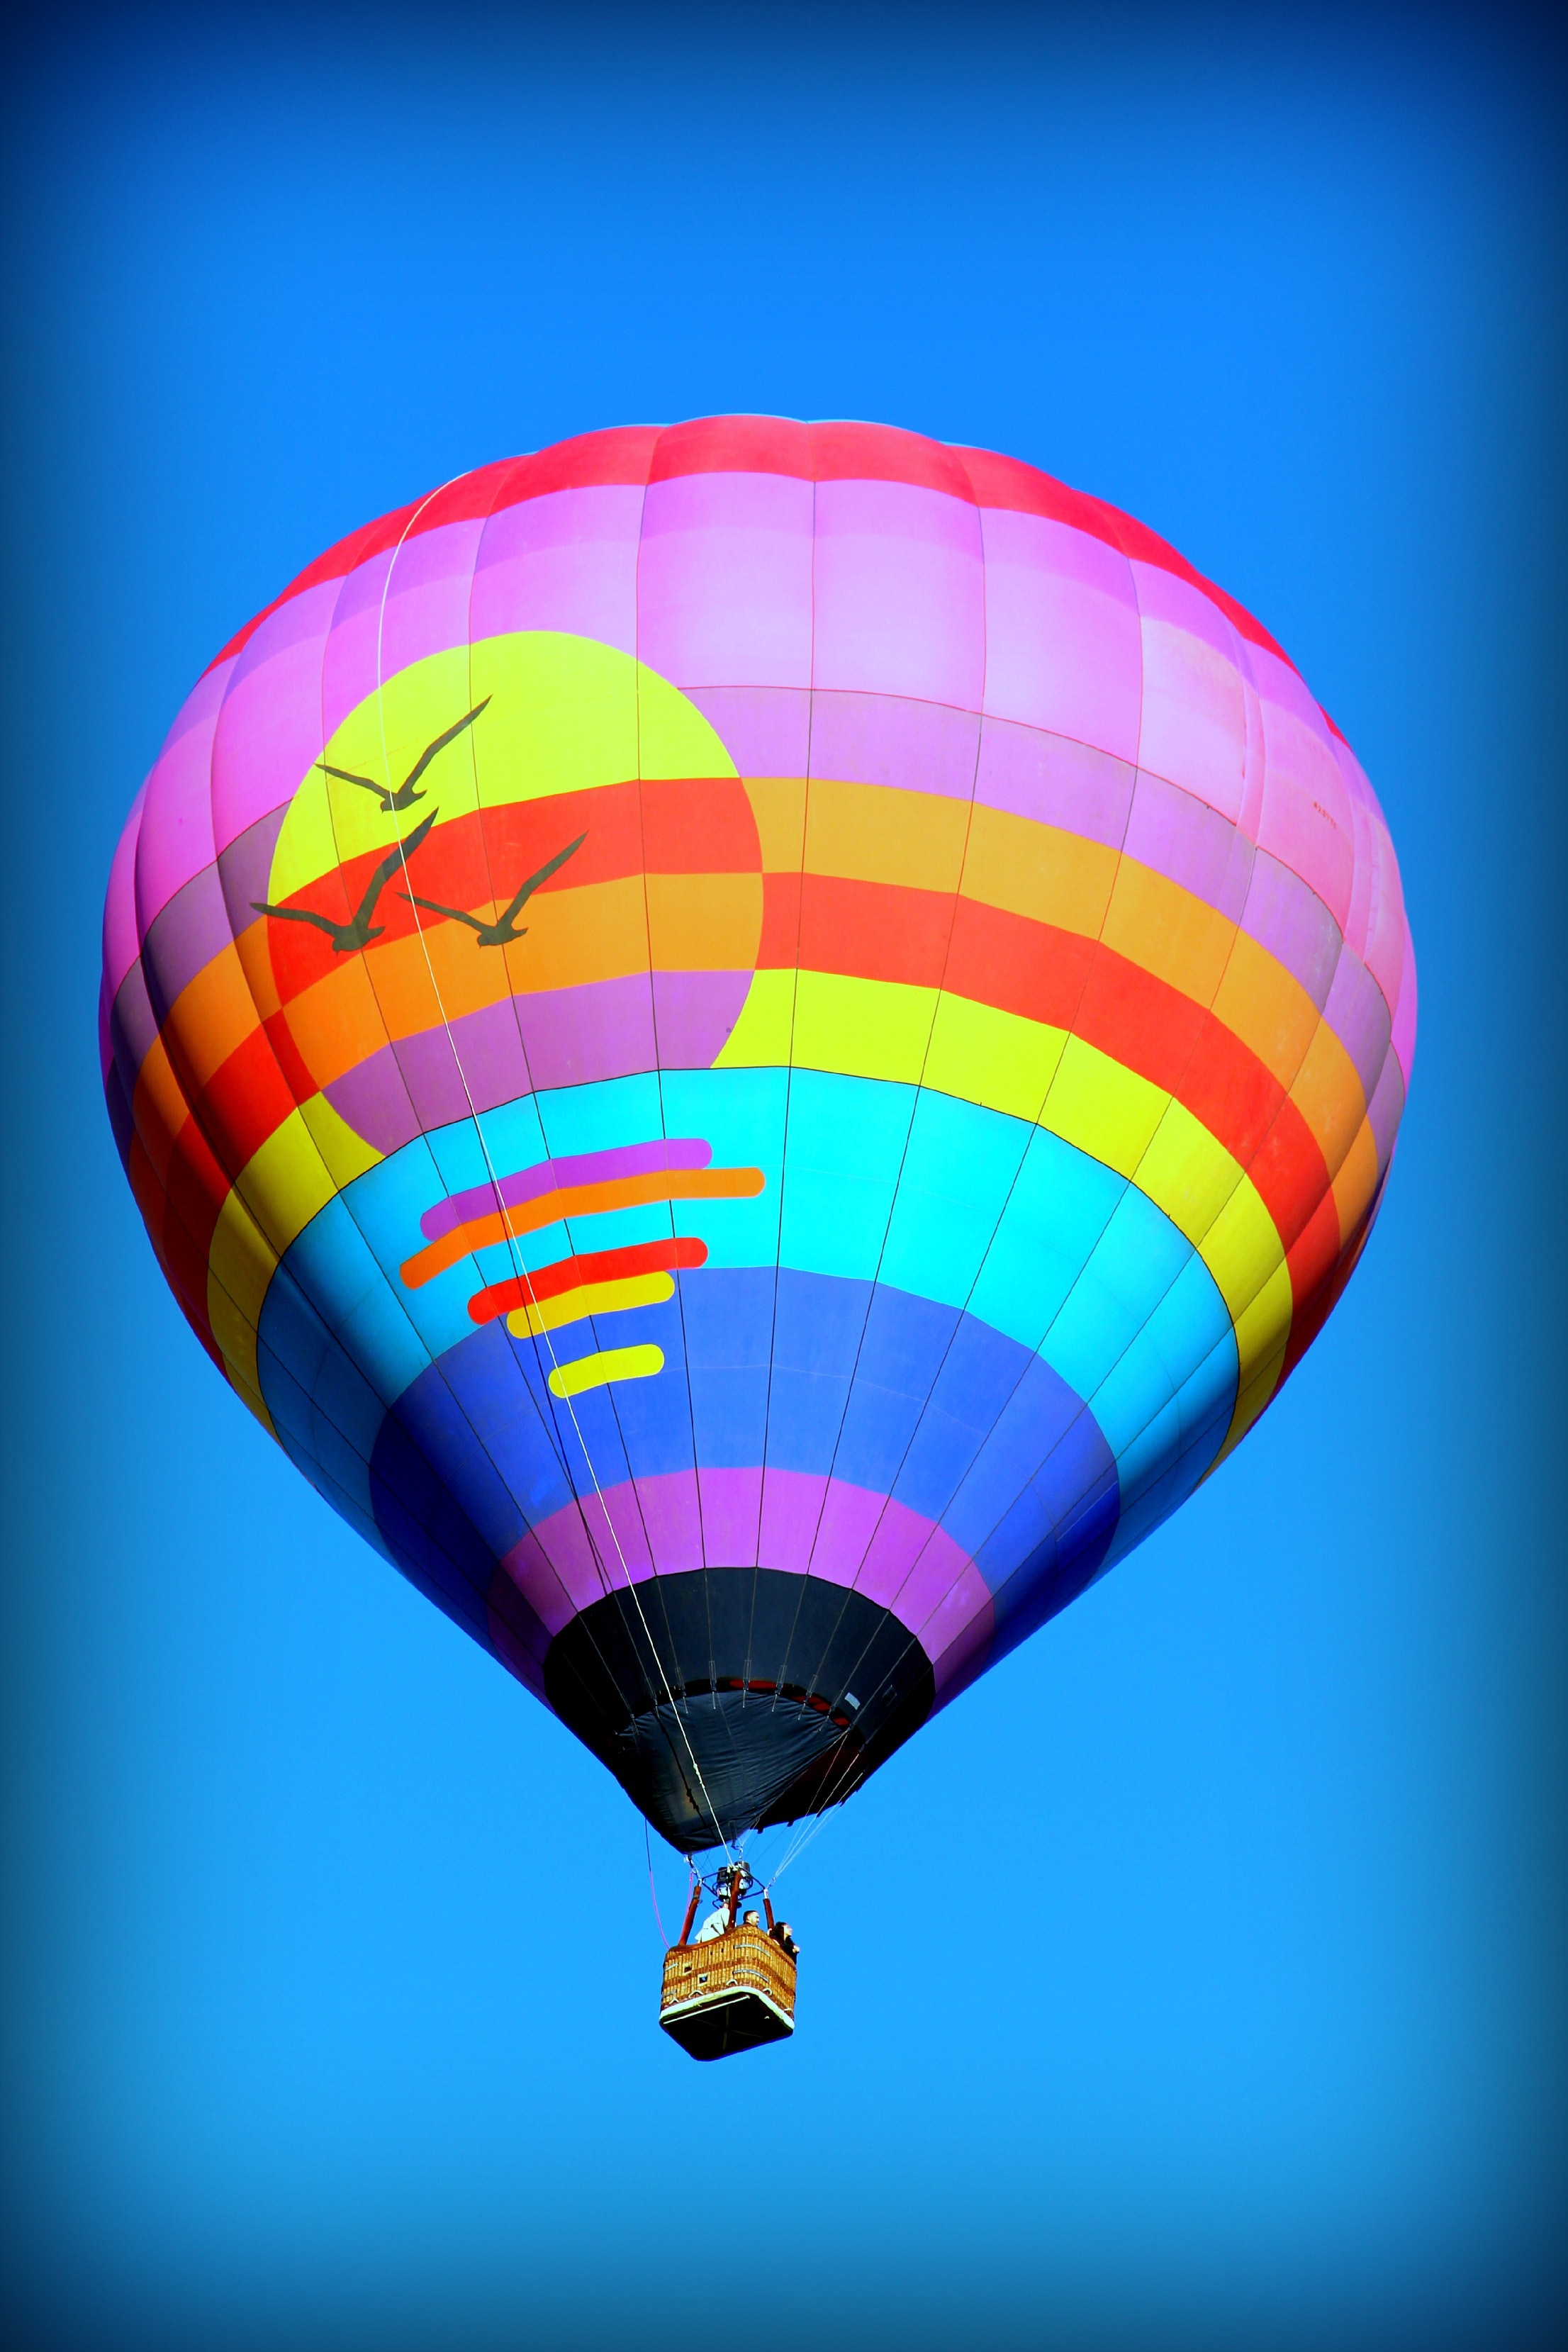 purple teal and yellow hot air balloon